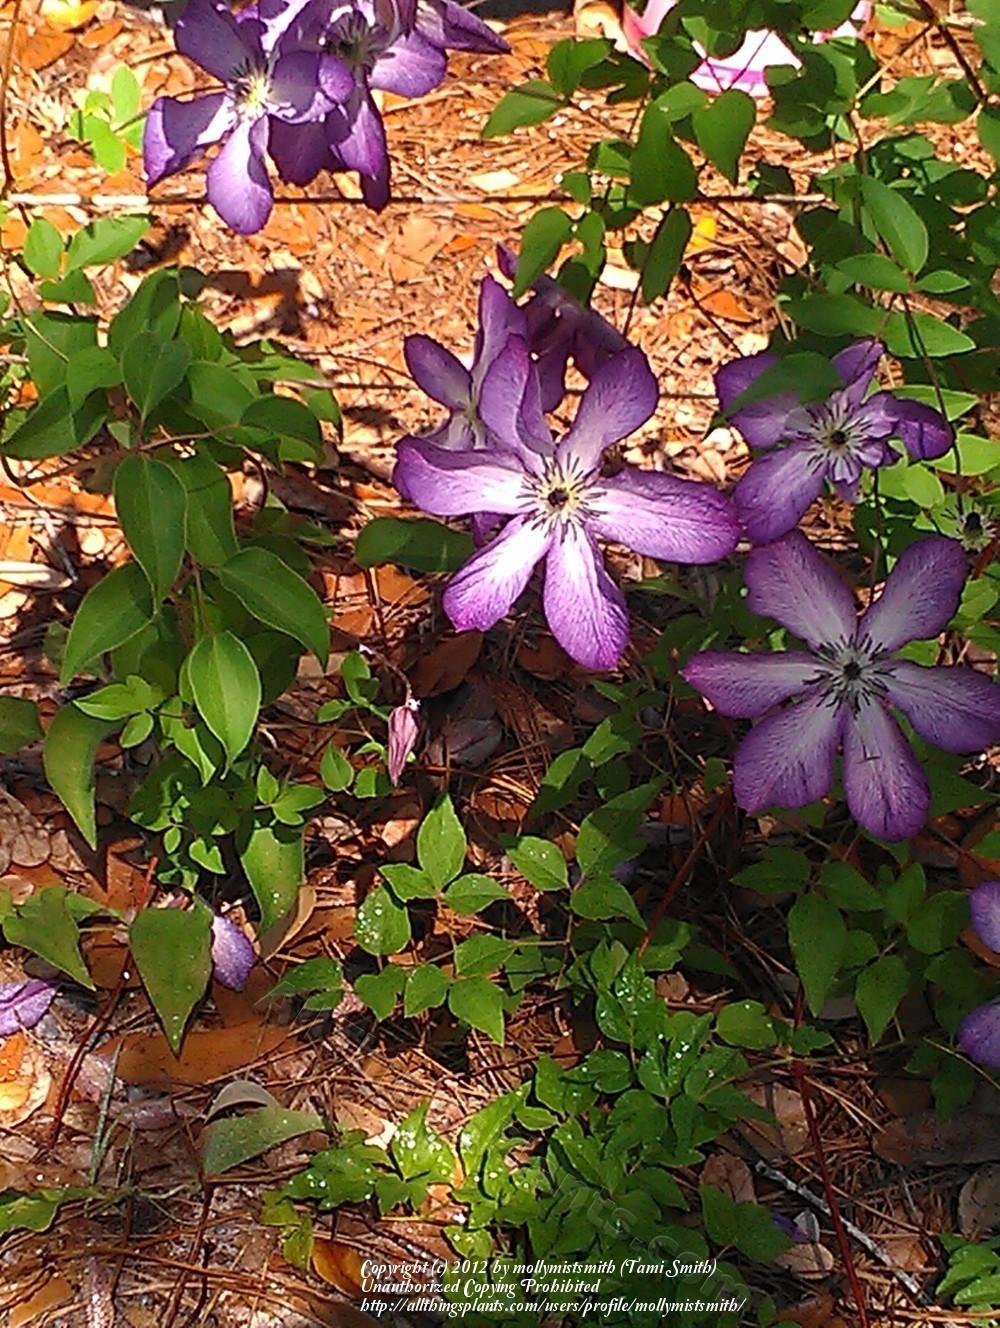 Photo of Clematis (Clematis viticella 'Venosa Violacea') uploaded by mollymistsmith